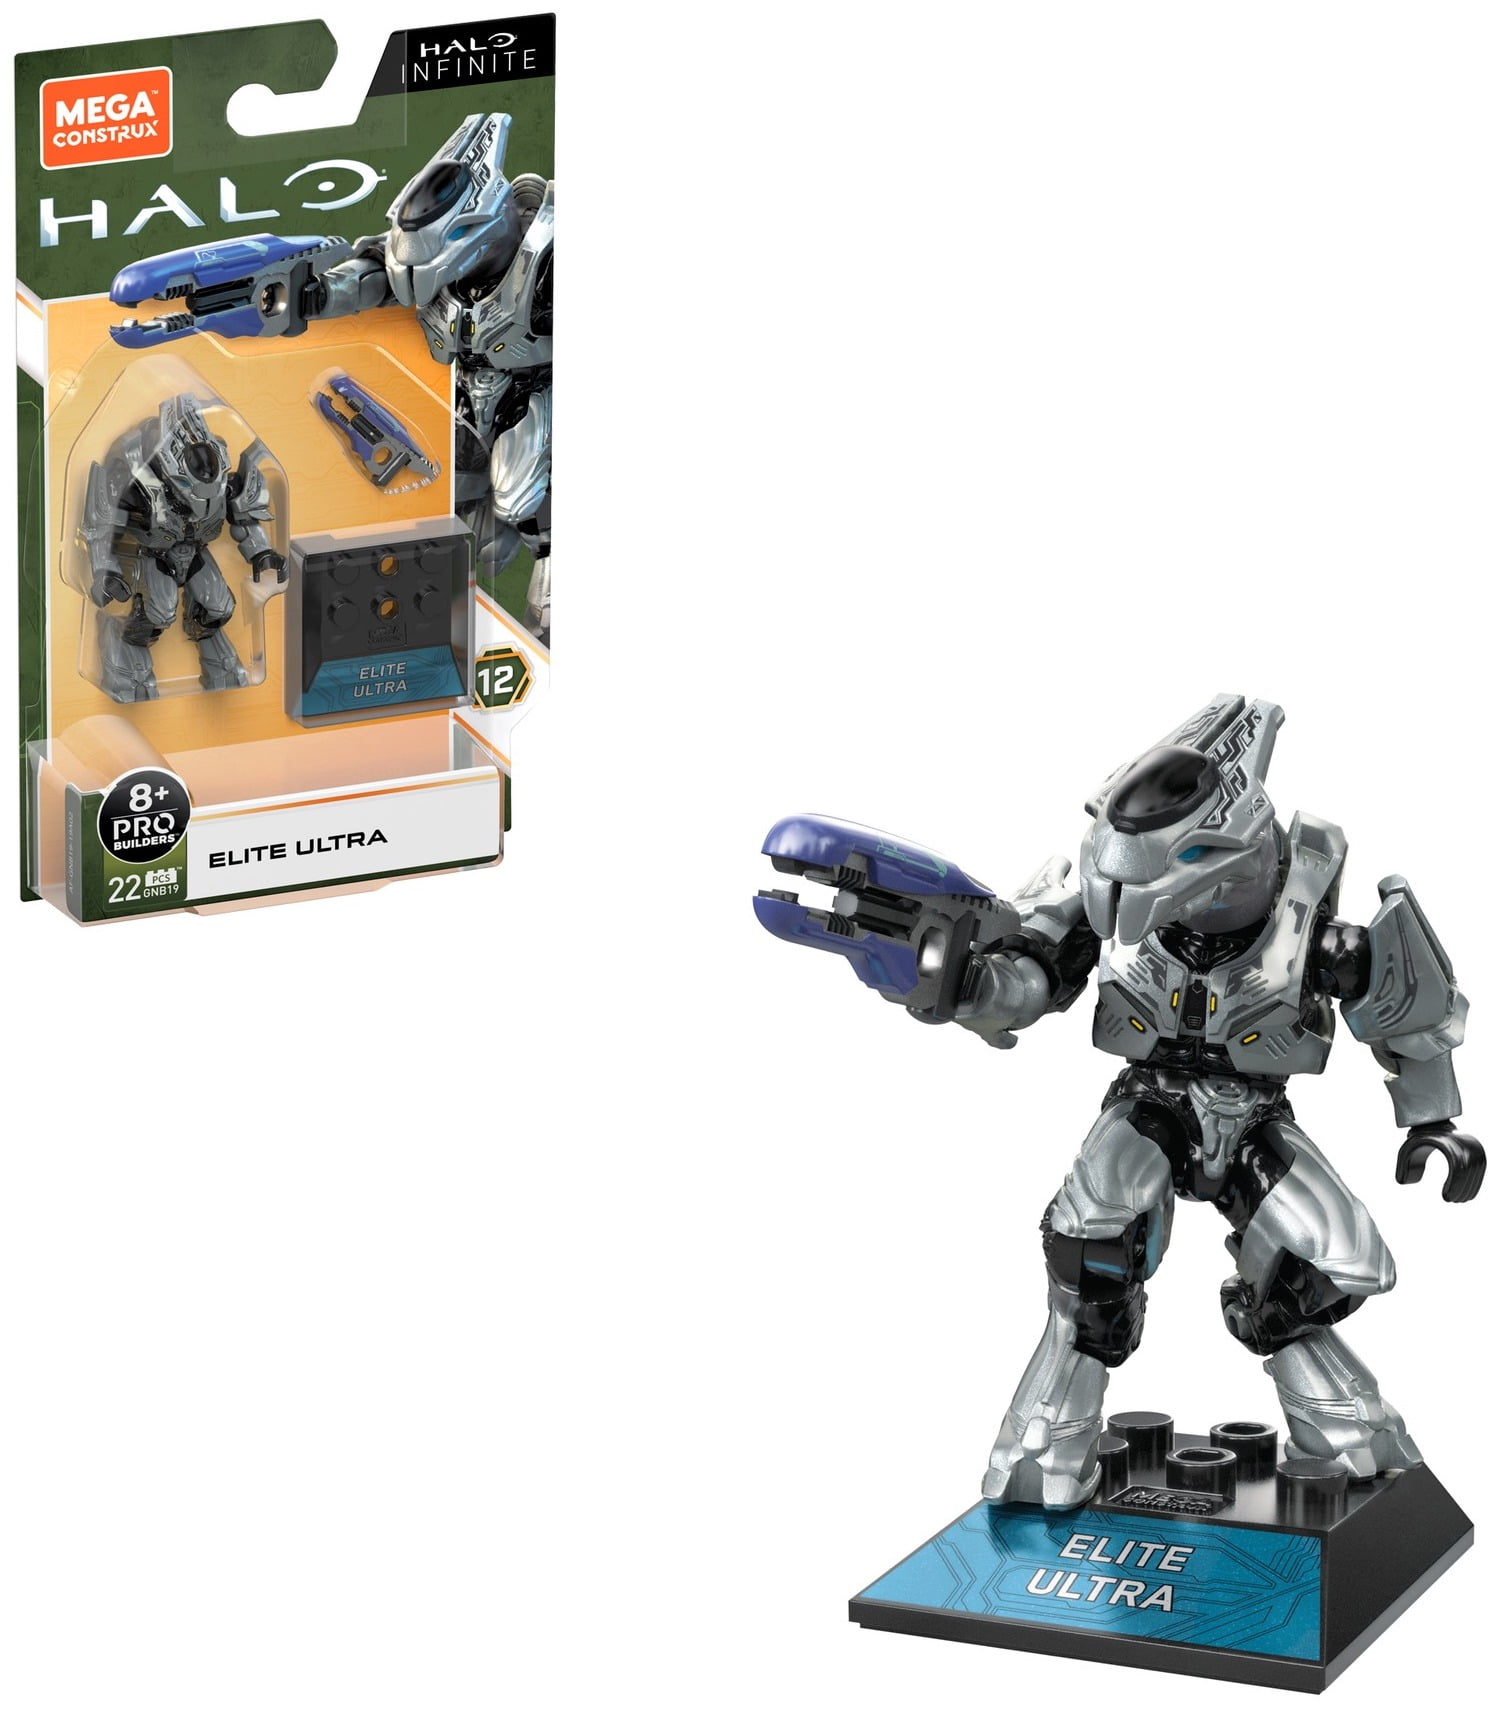 MEGA Construx 2019 Halo Series 11 Master Chief Overshield Figure GLB56 Dkw59 for sale online 